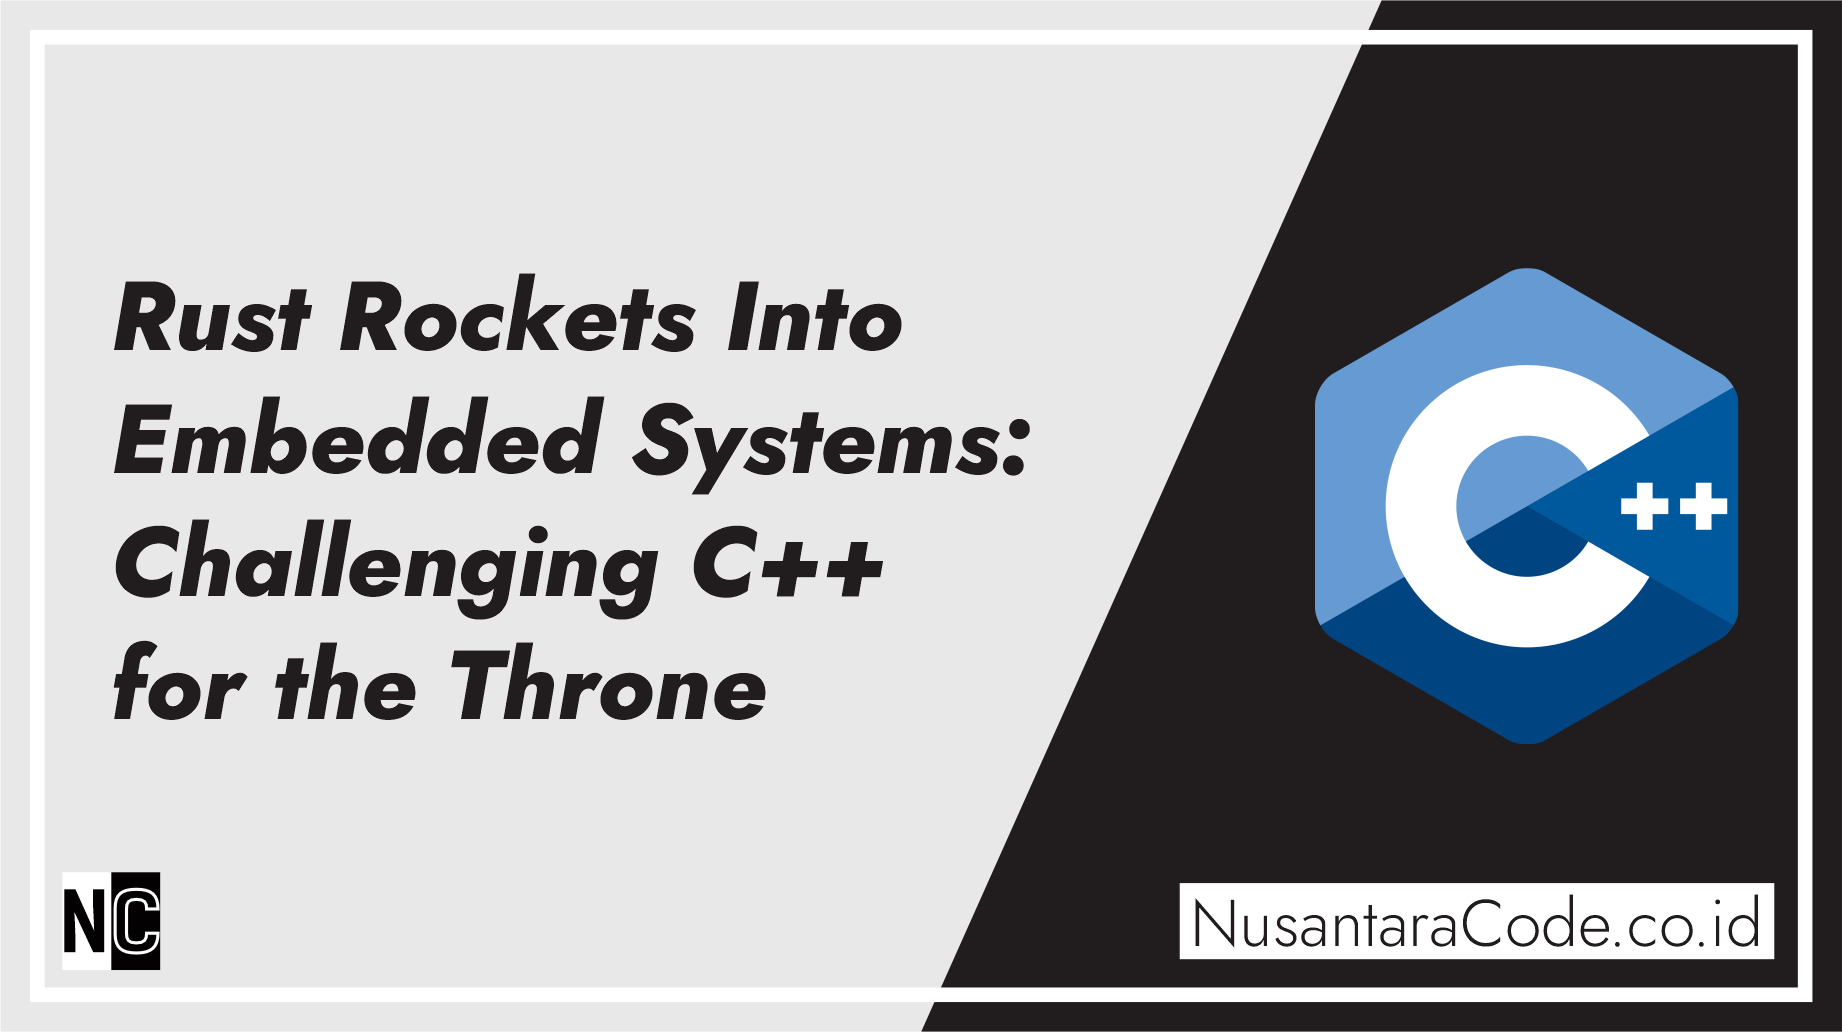 Rust Rockets Into Embedded Systems: Challenging C++ for the Throne